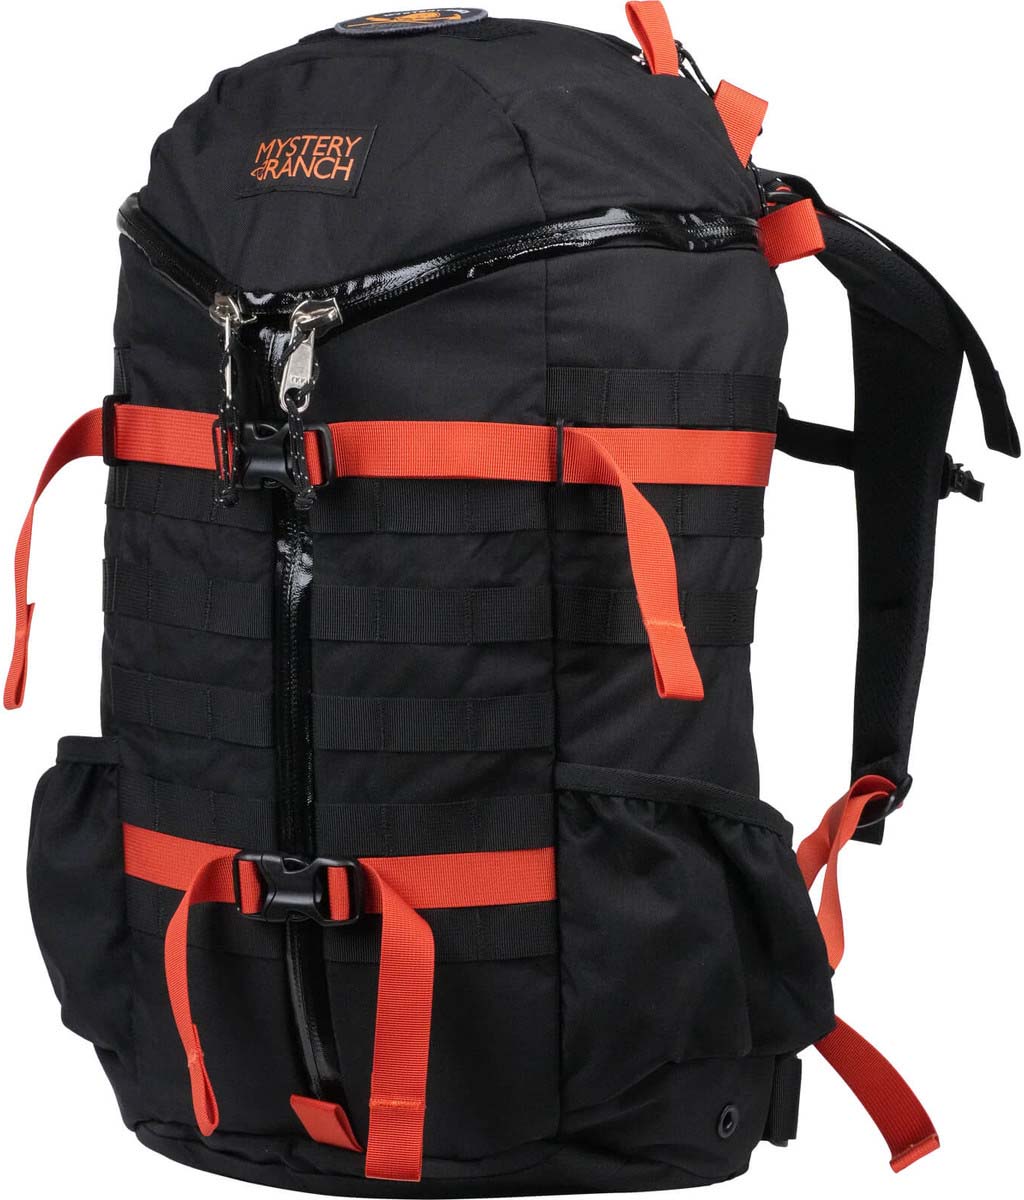 Mystery Ranch 2 Day Assault Daypack with Free S&H — CampSaver